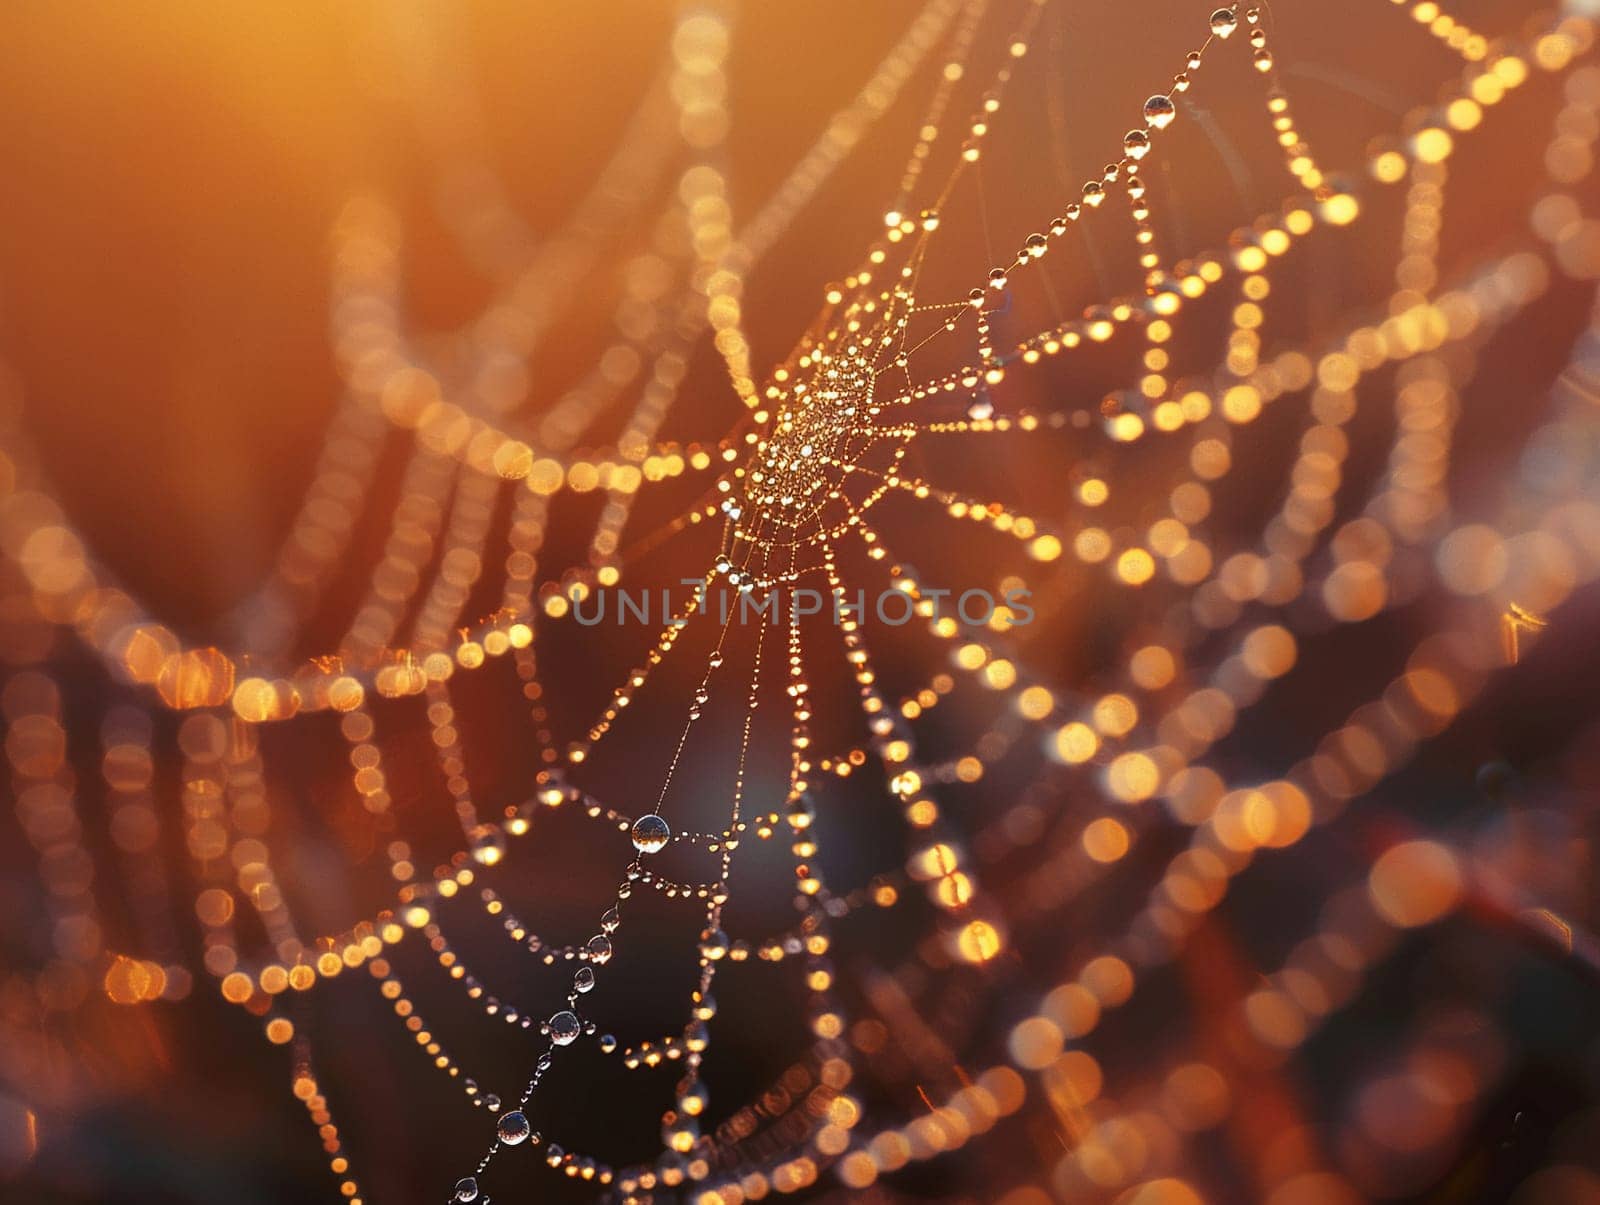 Water droplets on a spider web, surface illustration capturing the delicate balance and beauty of nature.